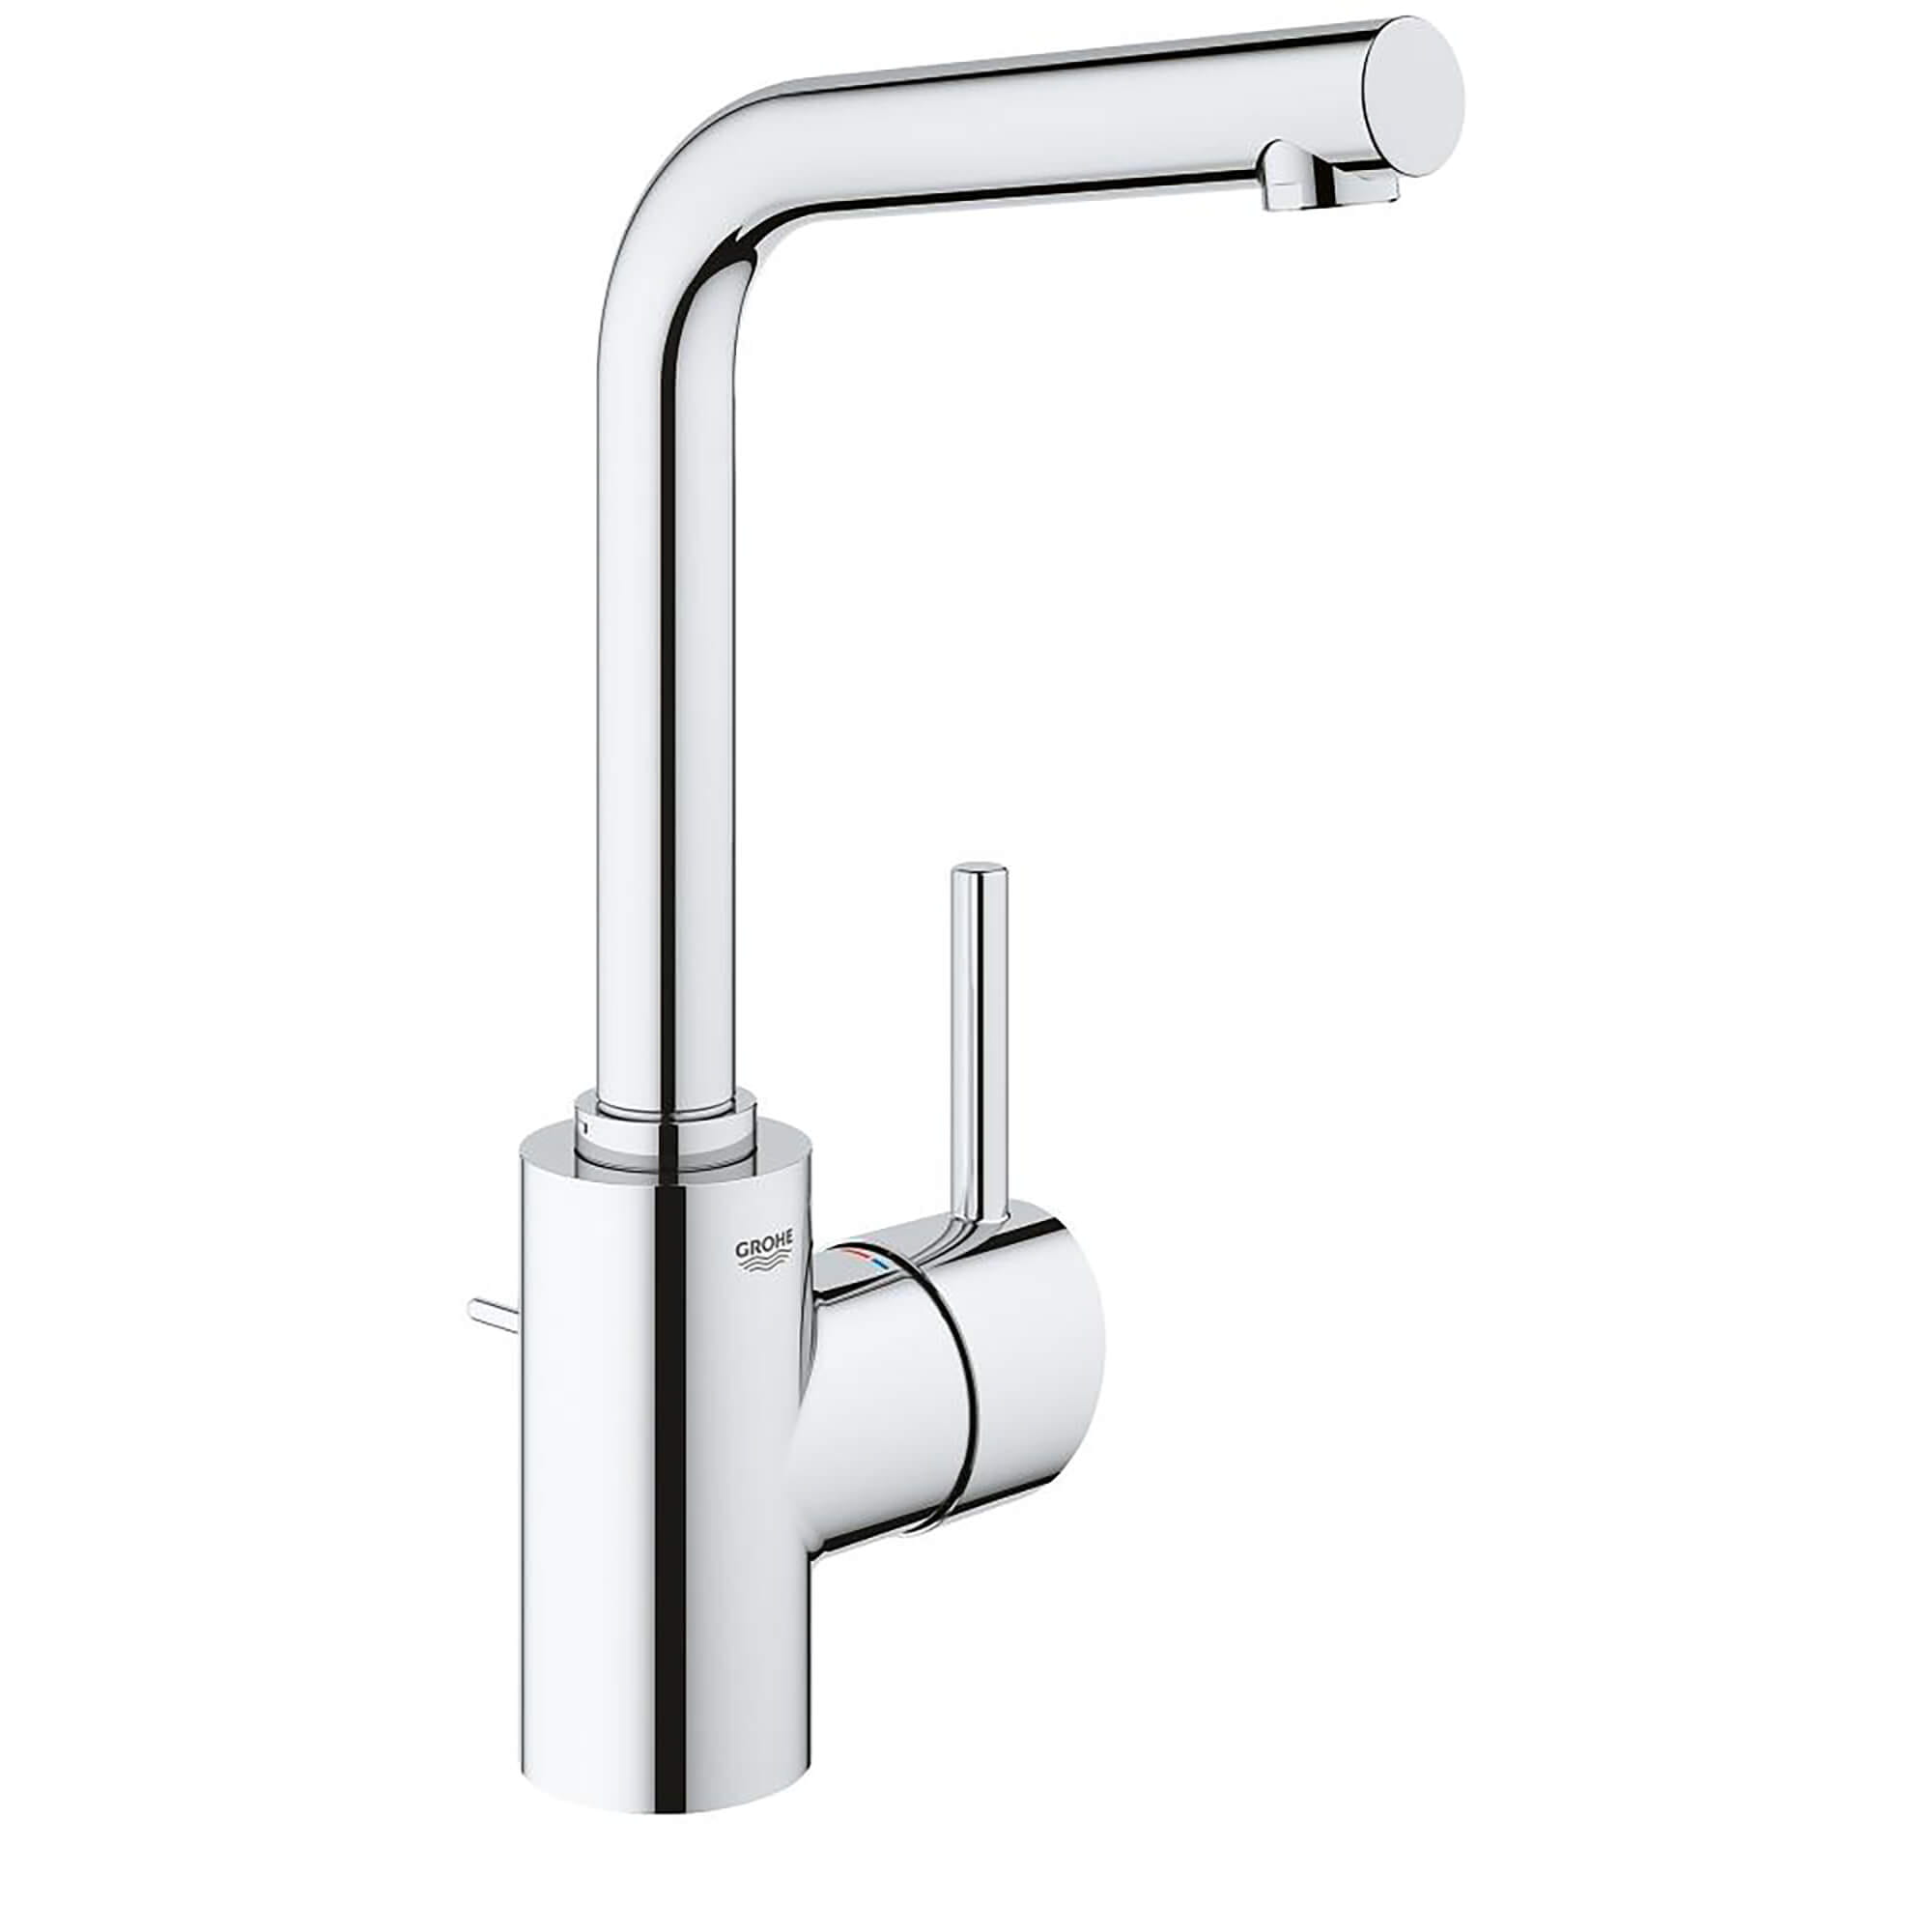 SINGLE HOLE SINGLE-HANDLE L-SIZE BATHROOM FAUCET 1.2 GPM-related